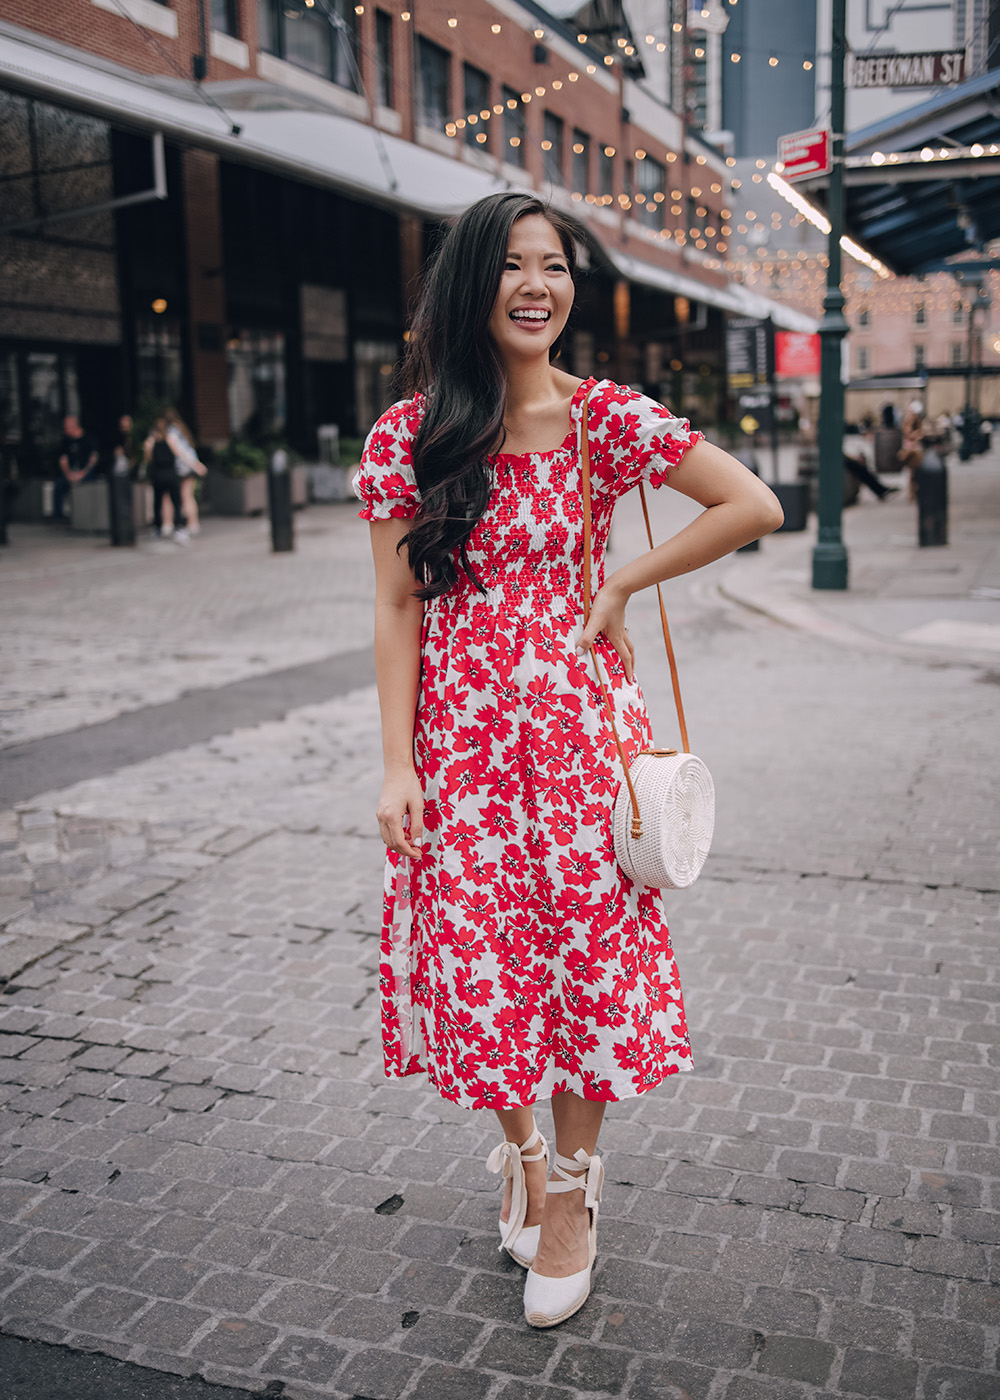 Bounce stock promotion Feminine & Floral for 4th of July – Skirt The Rules | NYC Style Blogger